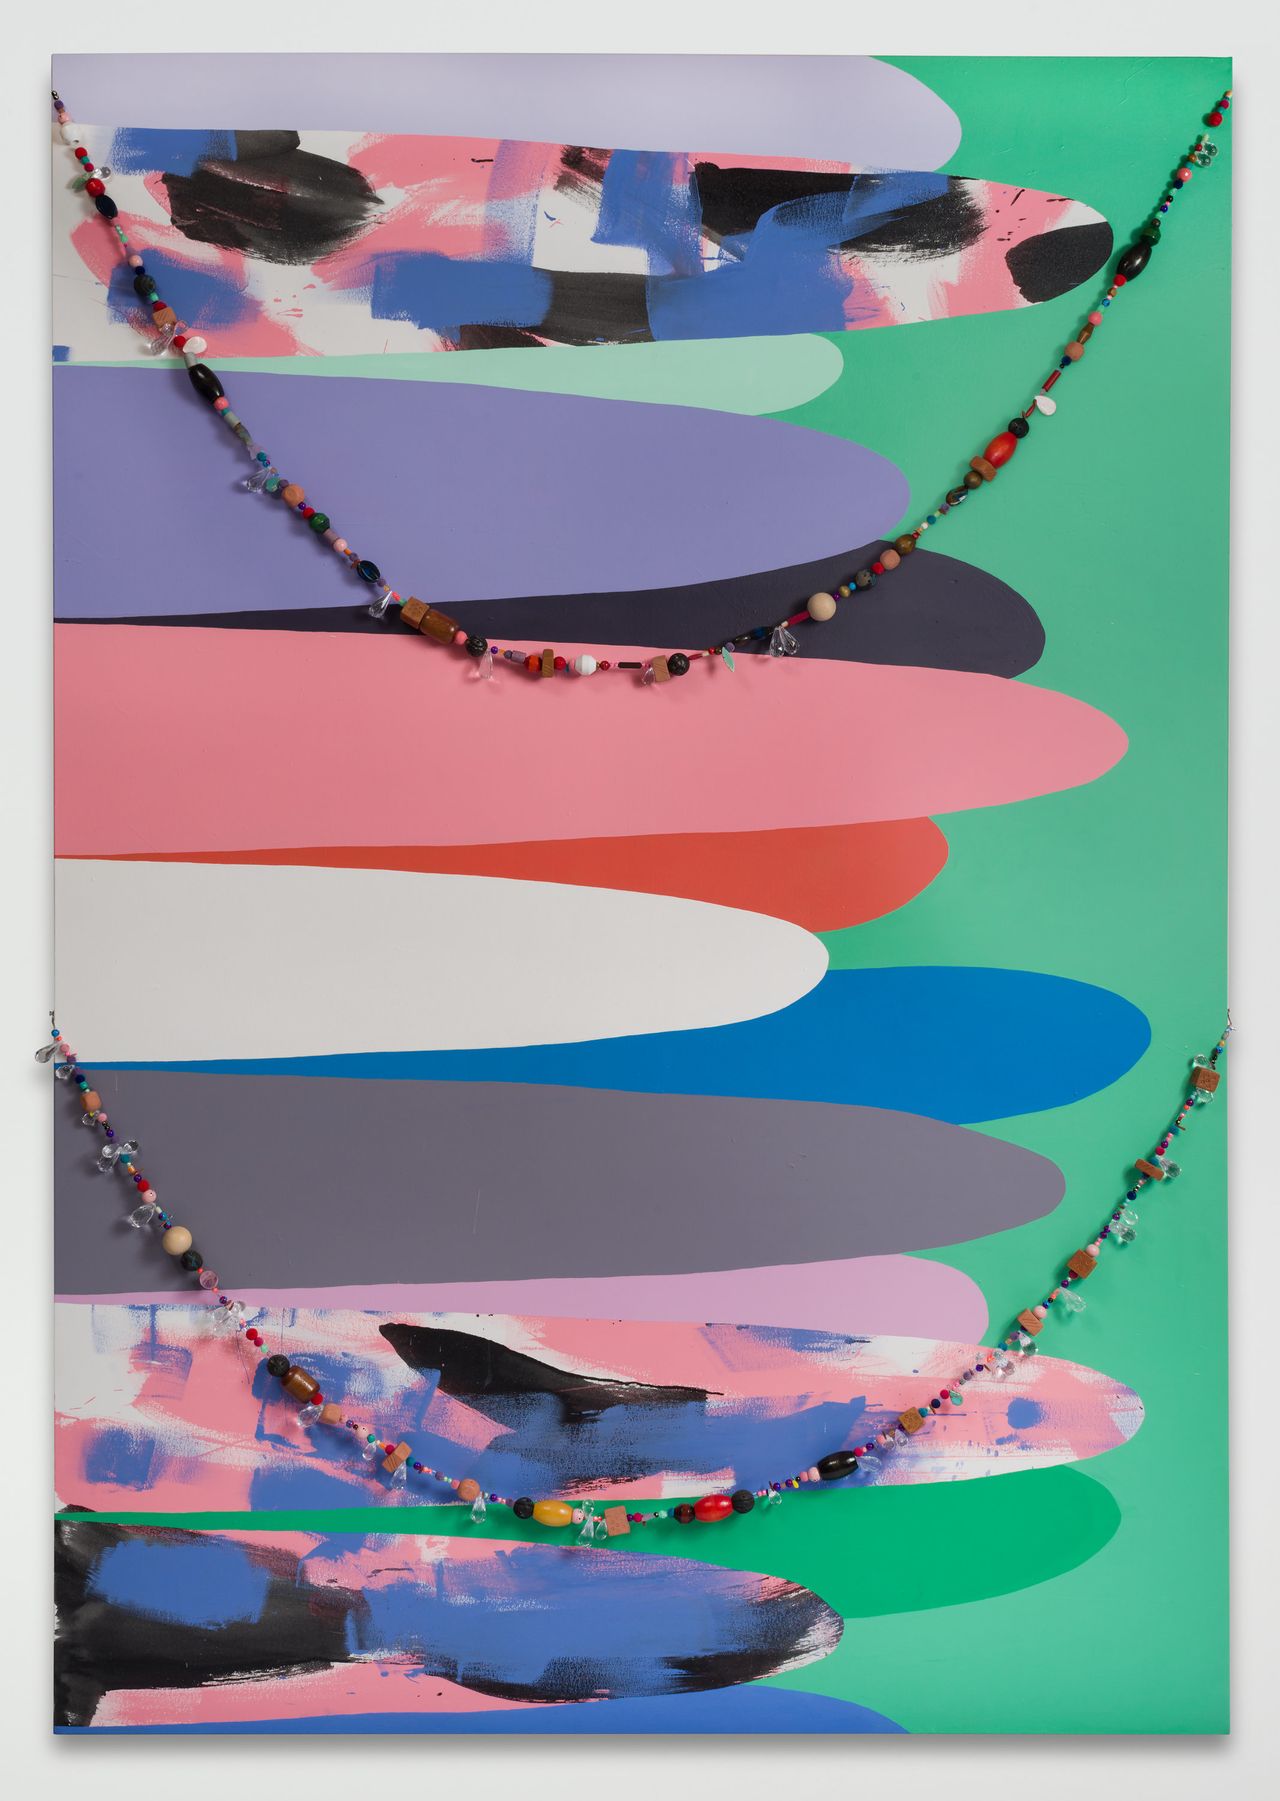 Sarah Cain, "untitled (beads)," 2016. Acrylic, beads, and string on canvas, 104 x 72 inches.